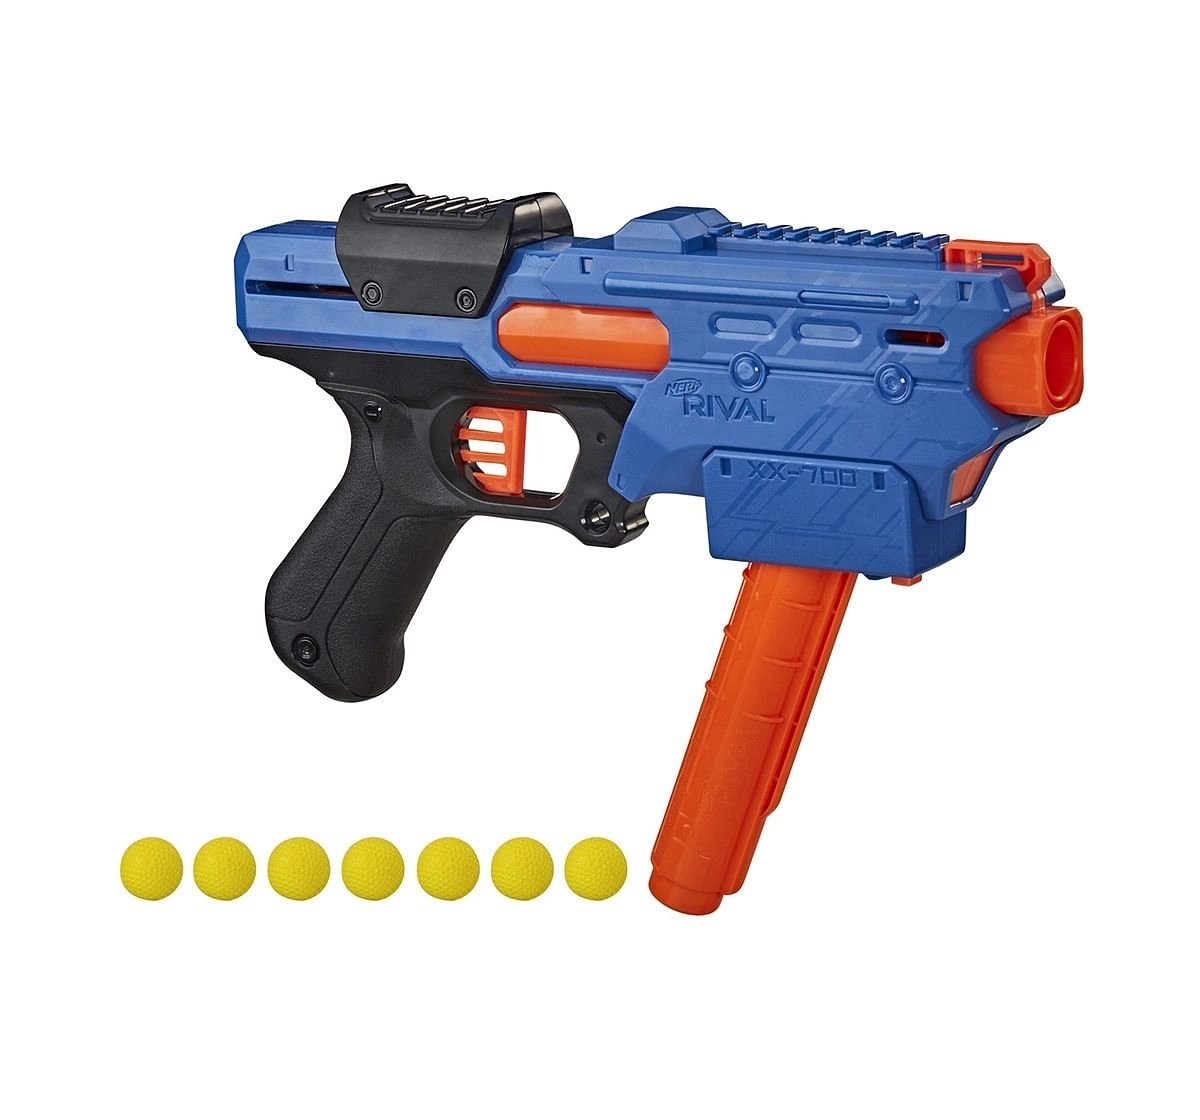 Nerf Rival Finisher XX-700 Blaster Toy Gun -- Quick-Load Magazine, Spring Action, Includes 7 Official Nerf Rival Rounds -- Team Blue Blasters for Kids age 14Y+ 